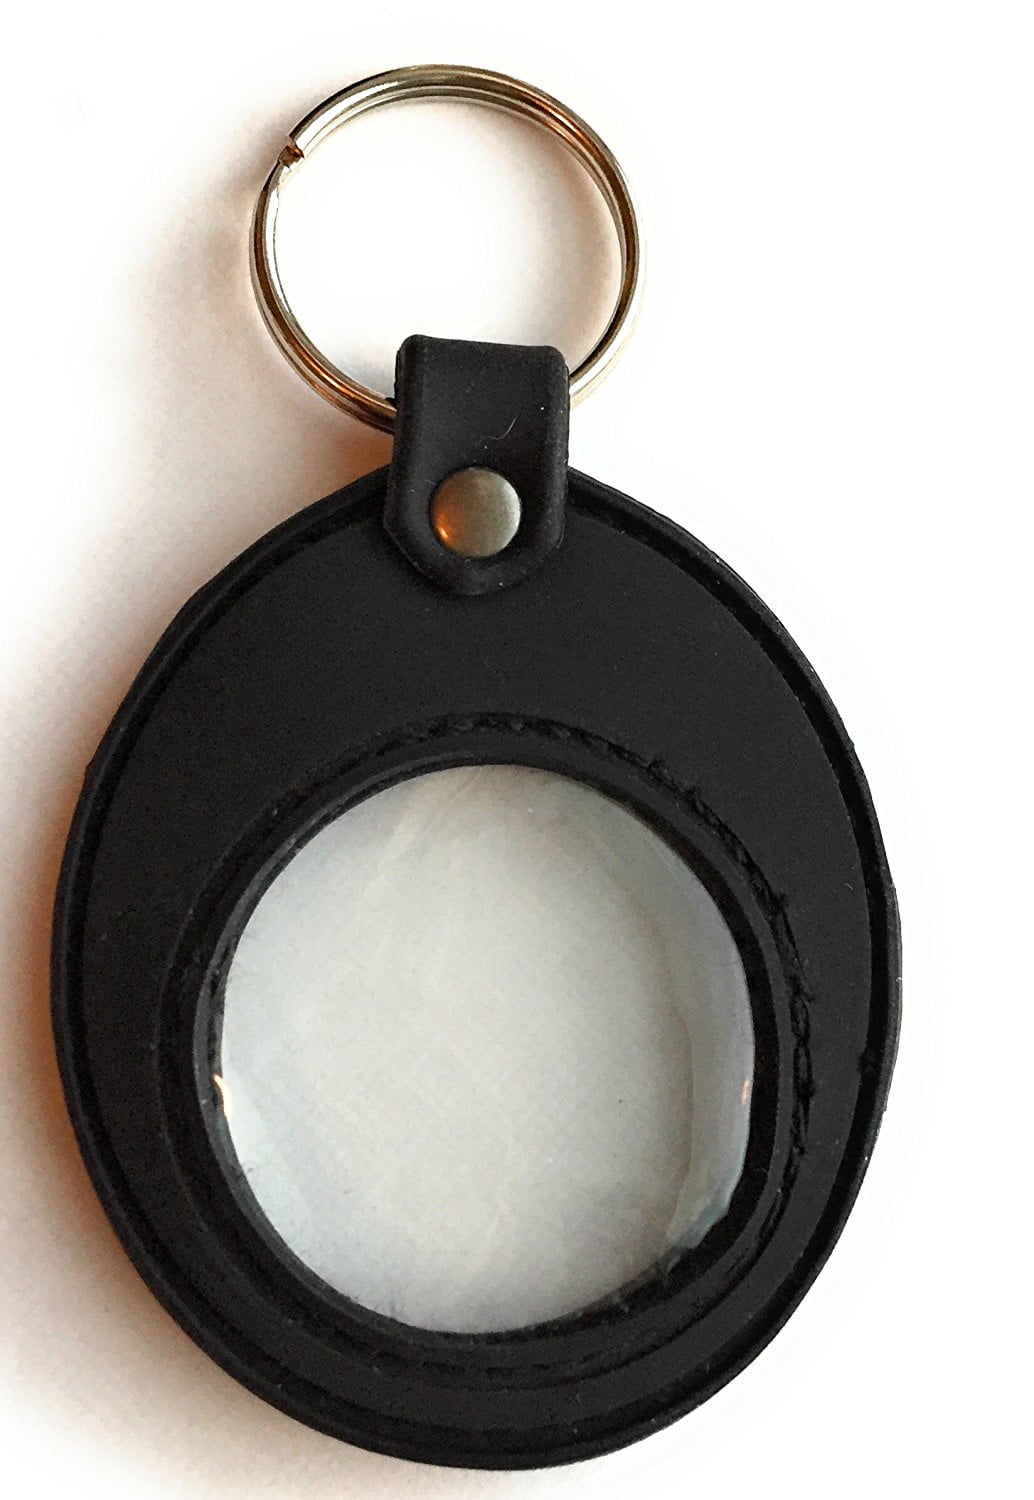 RecoveryChip Universal AA Medallion or Challenge Coin Holder Keychain Black  Soft Silicone 